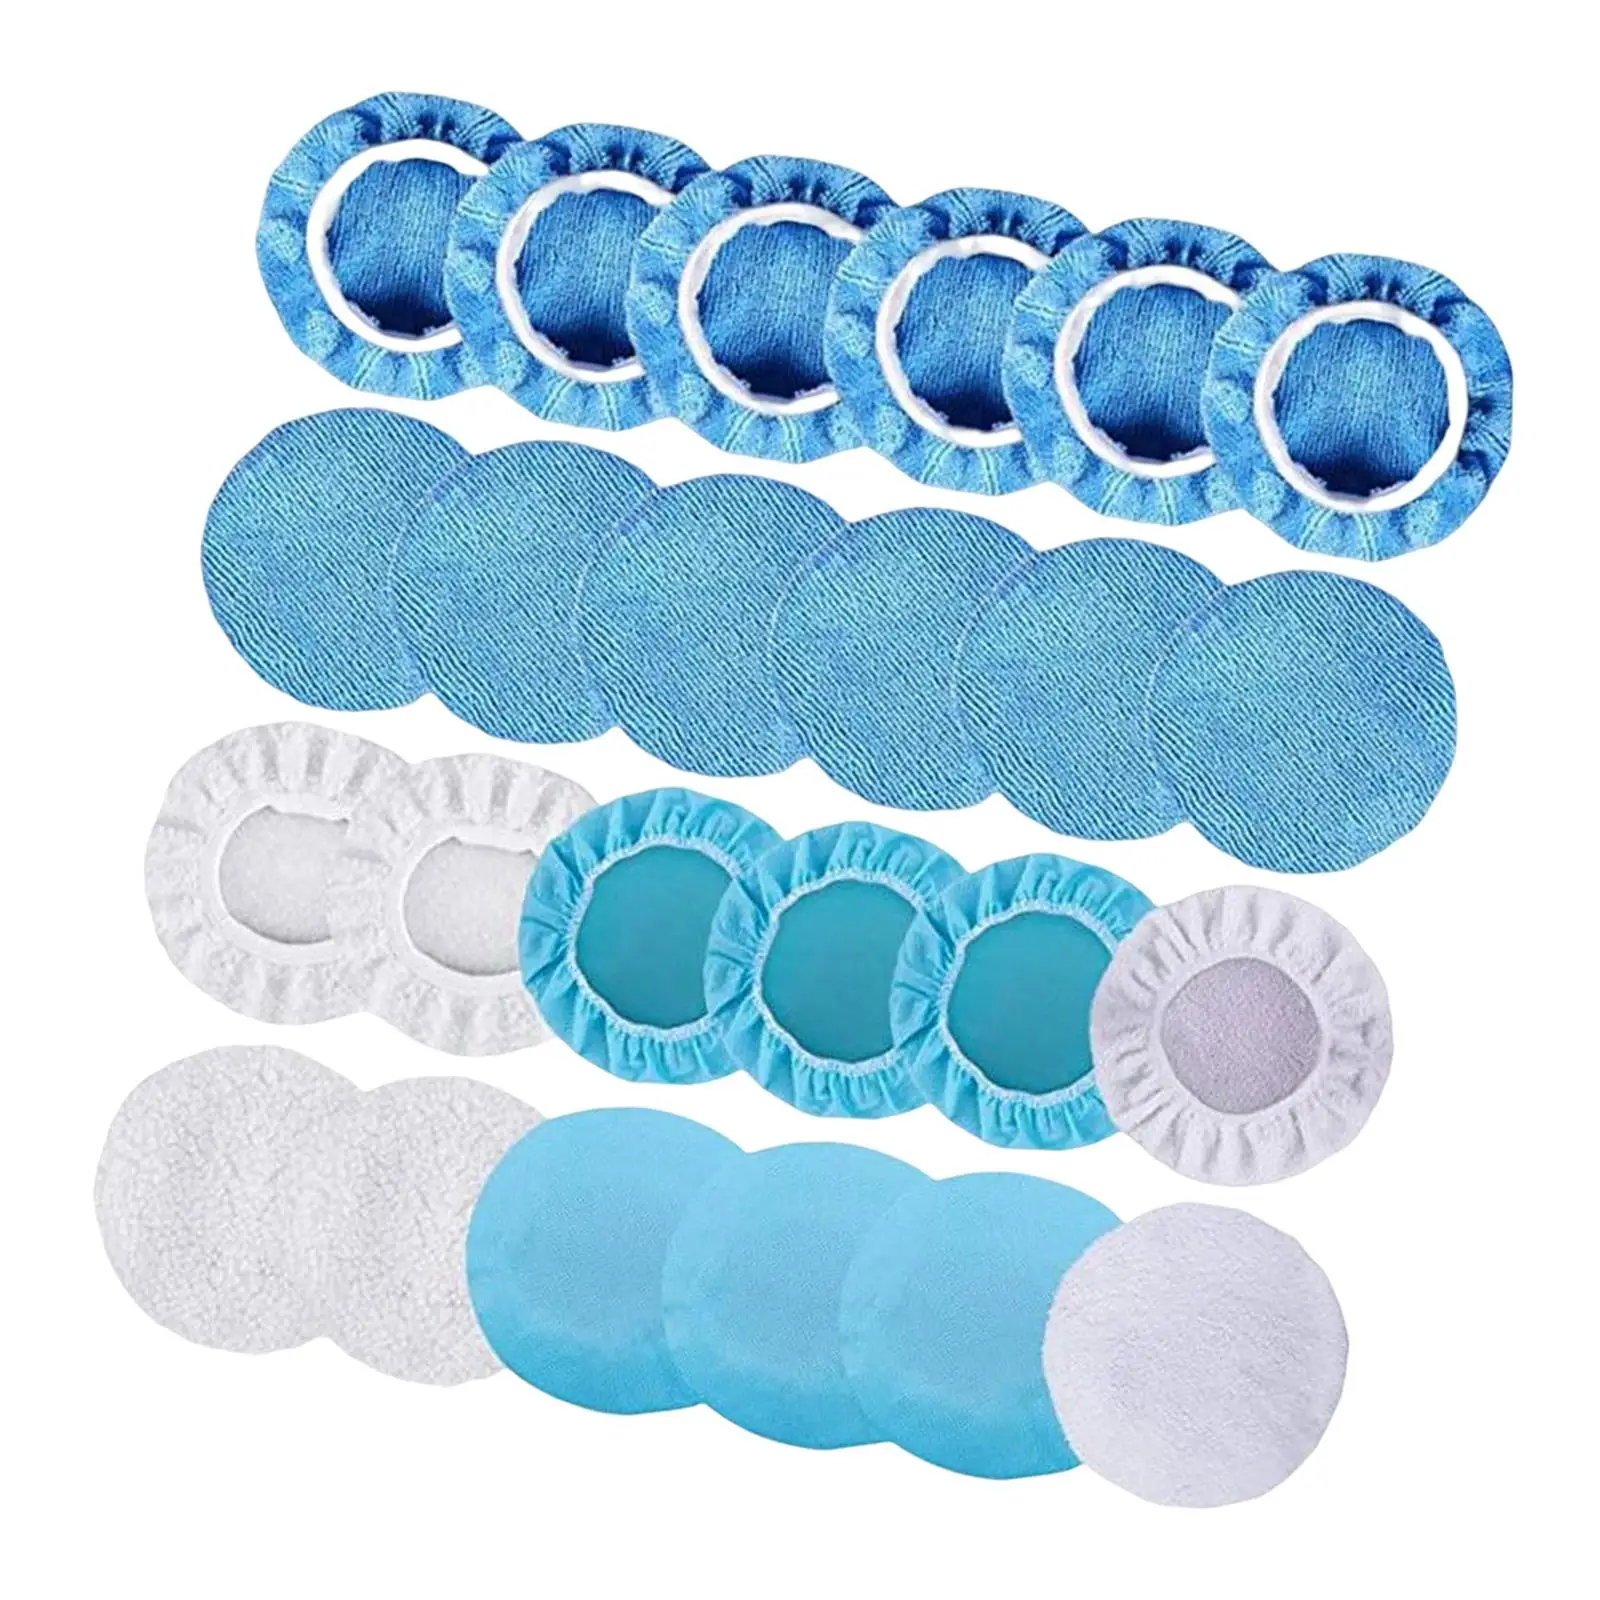 24Pcs Detailing Buffing Pads Portable Durable Cleaning Pads Polishing Pads for